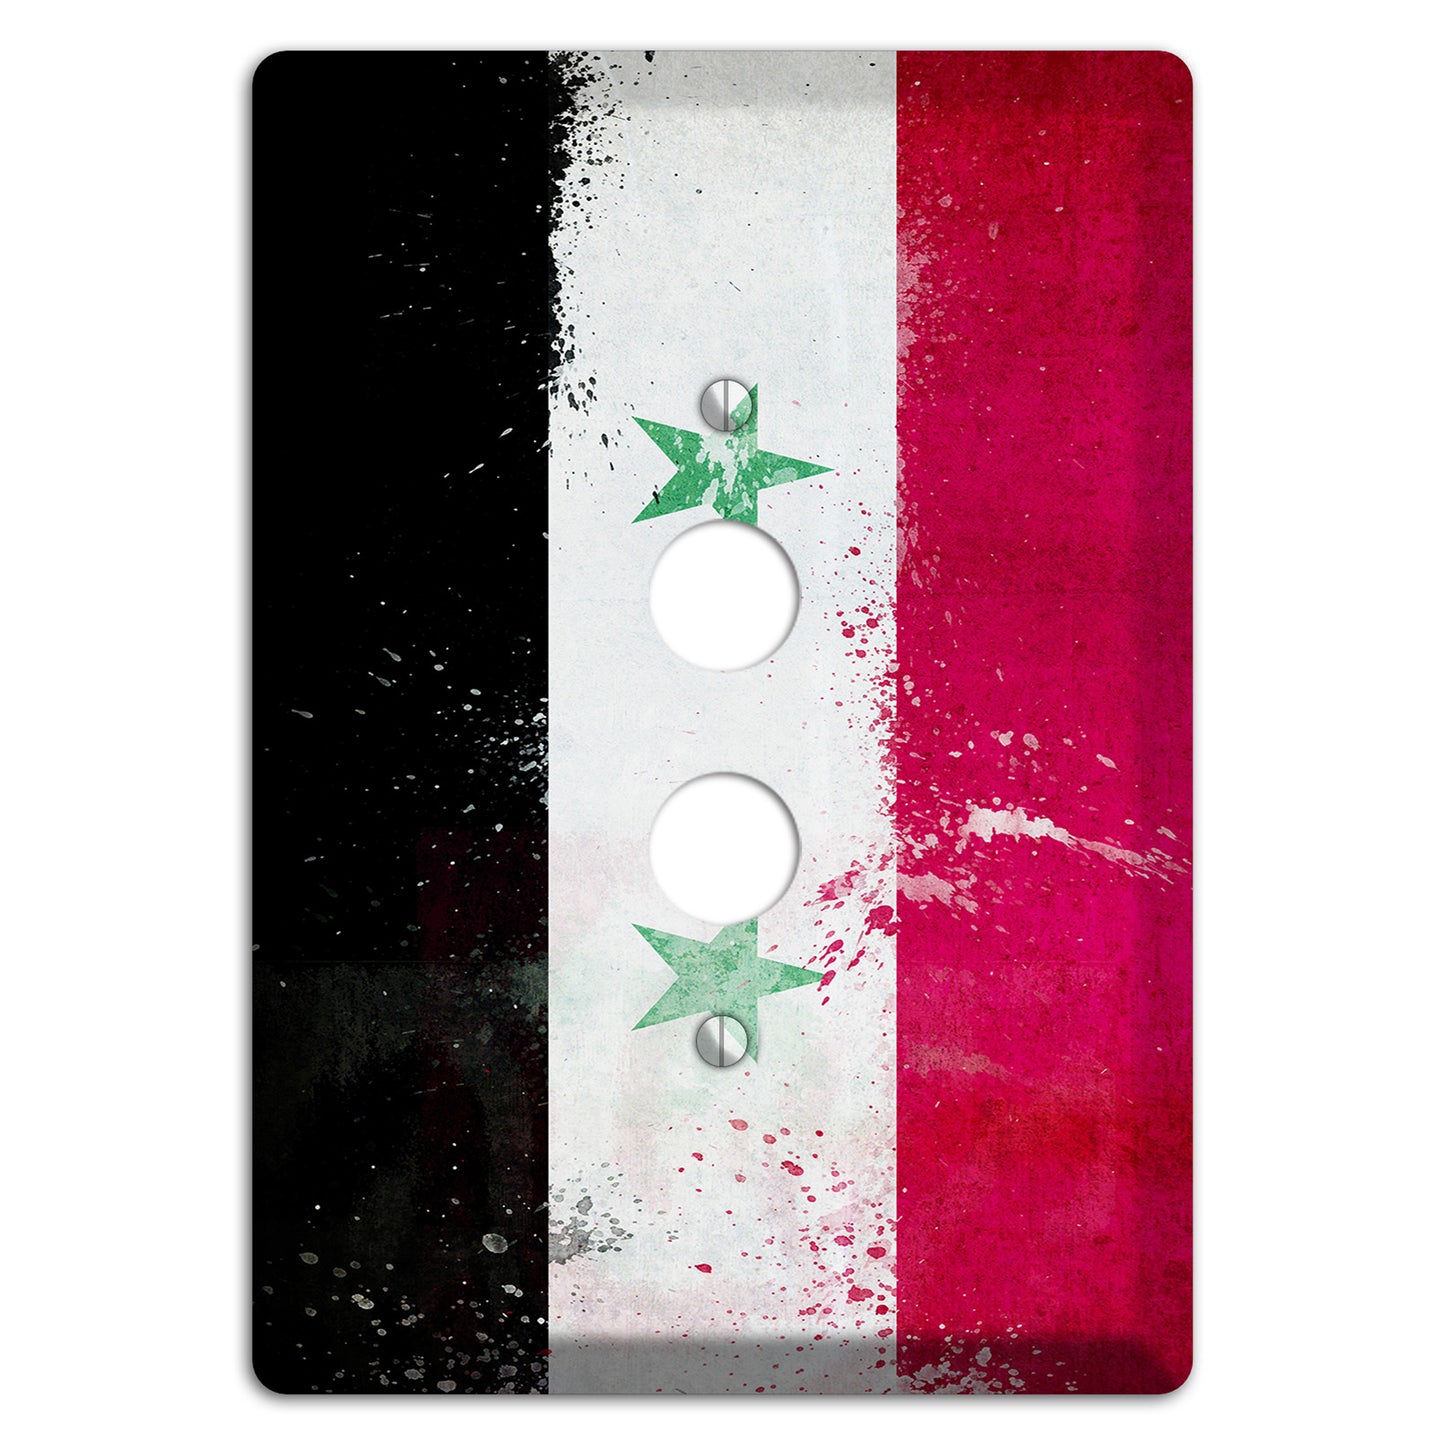 Syria Cover Plates 1 Pushbutton Wallplate